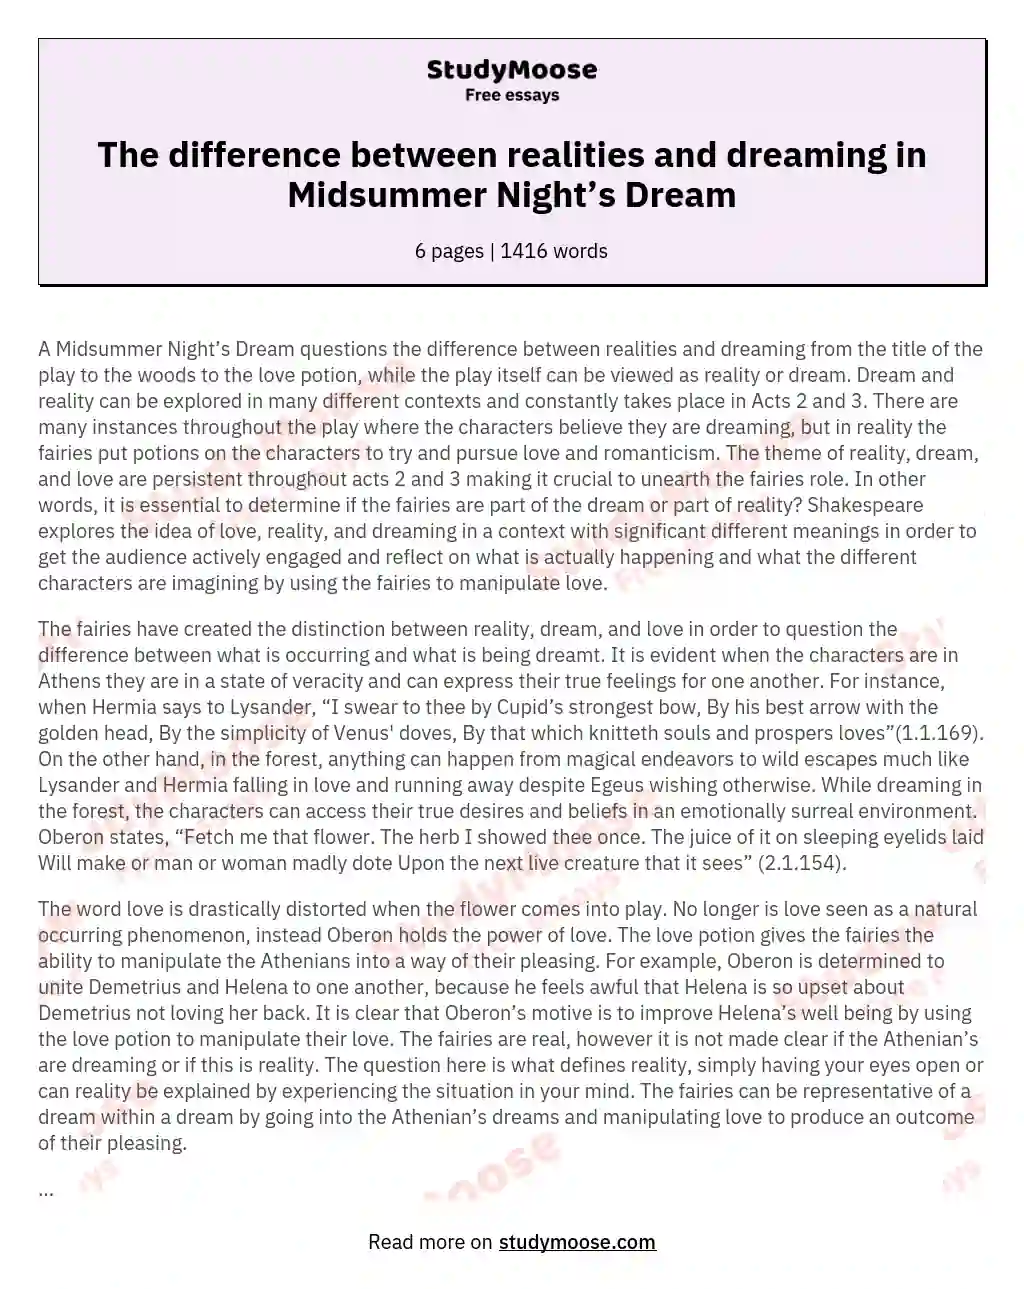 The difference between realities and dreaming in Midsummer Night’s Dream essay